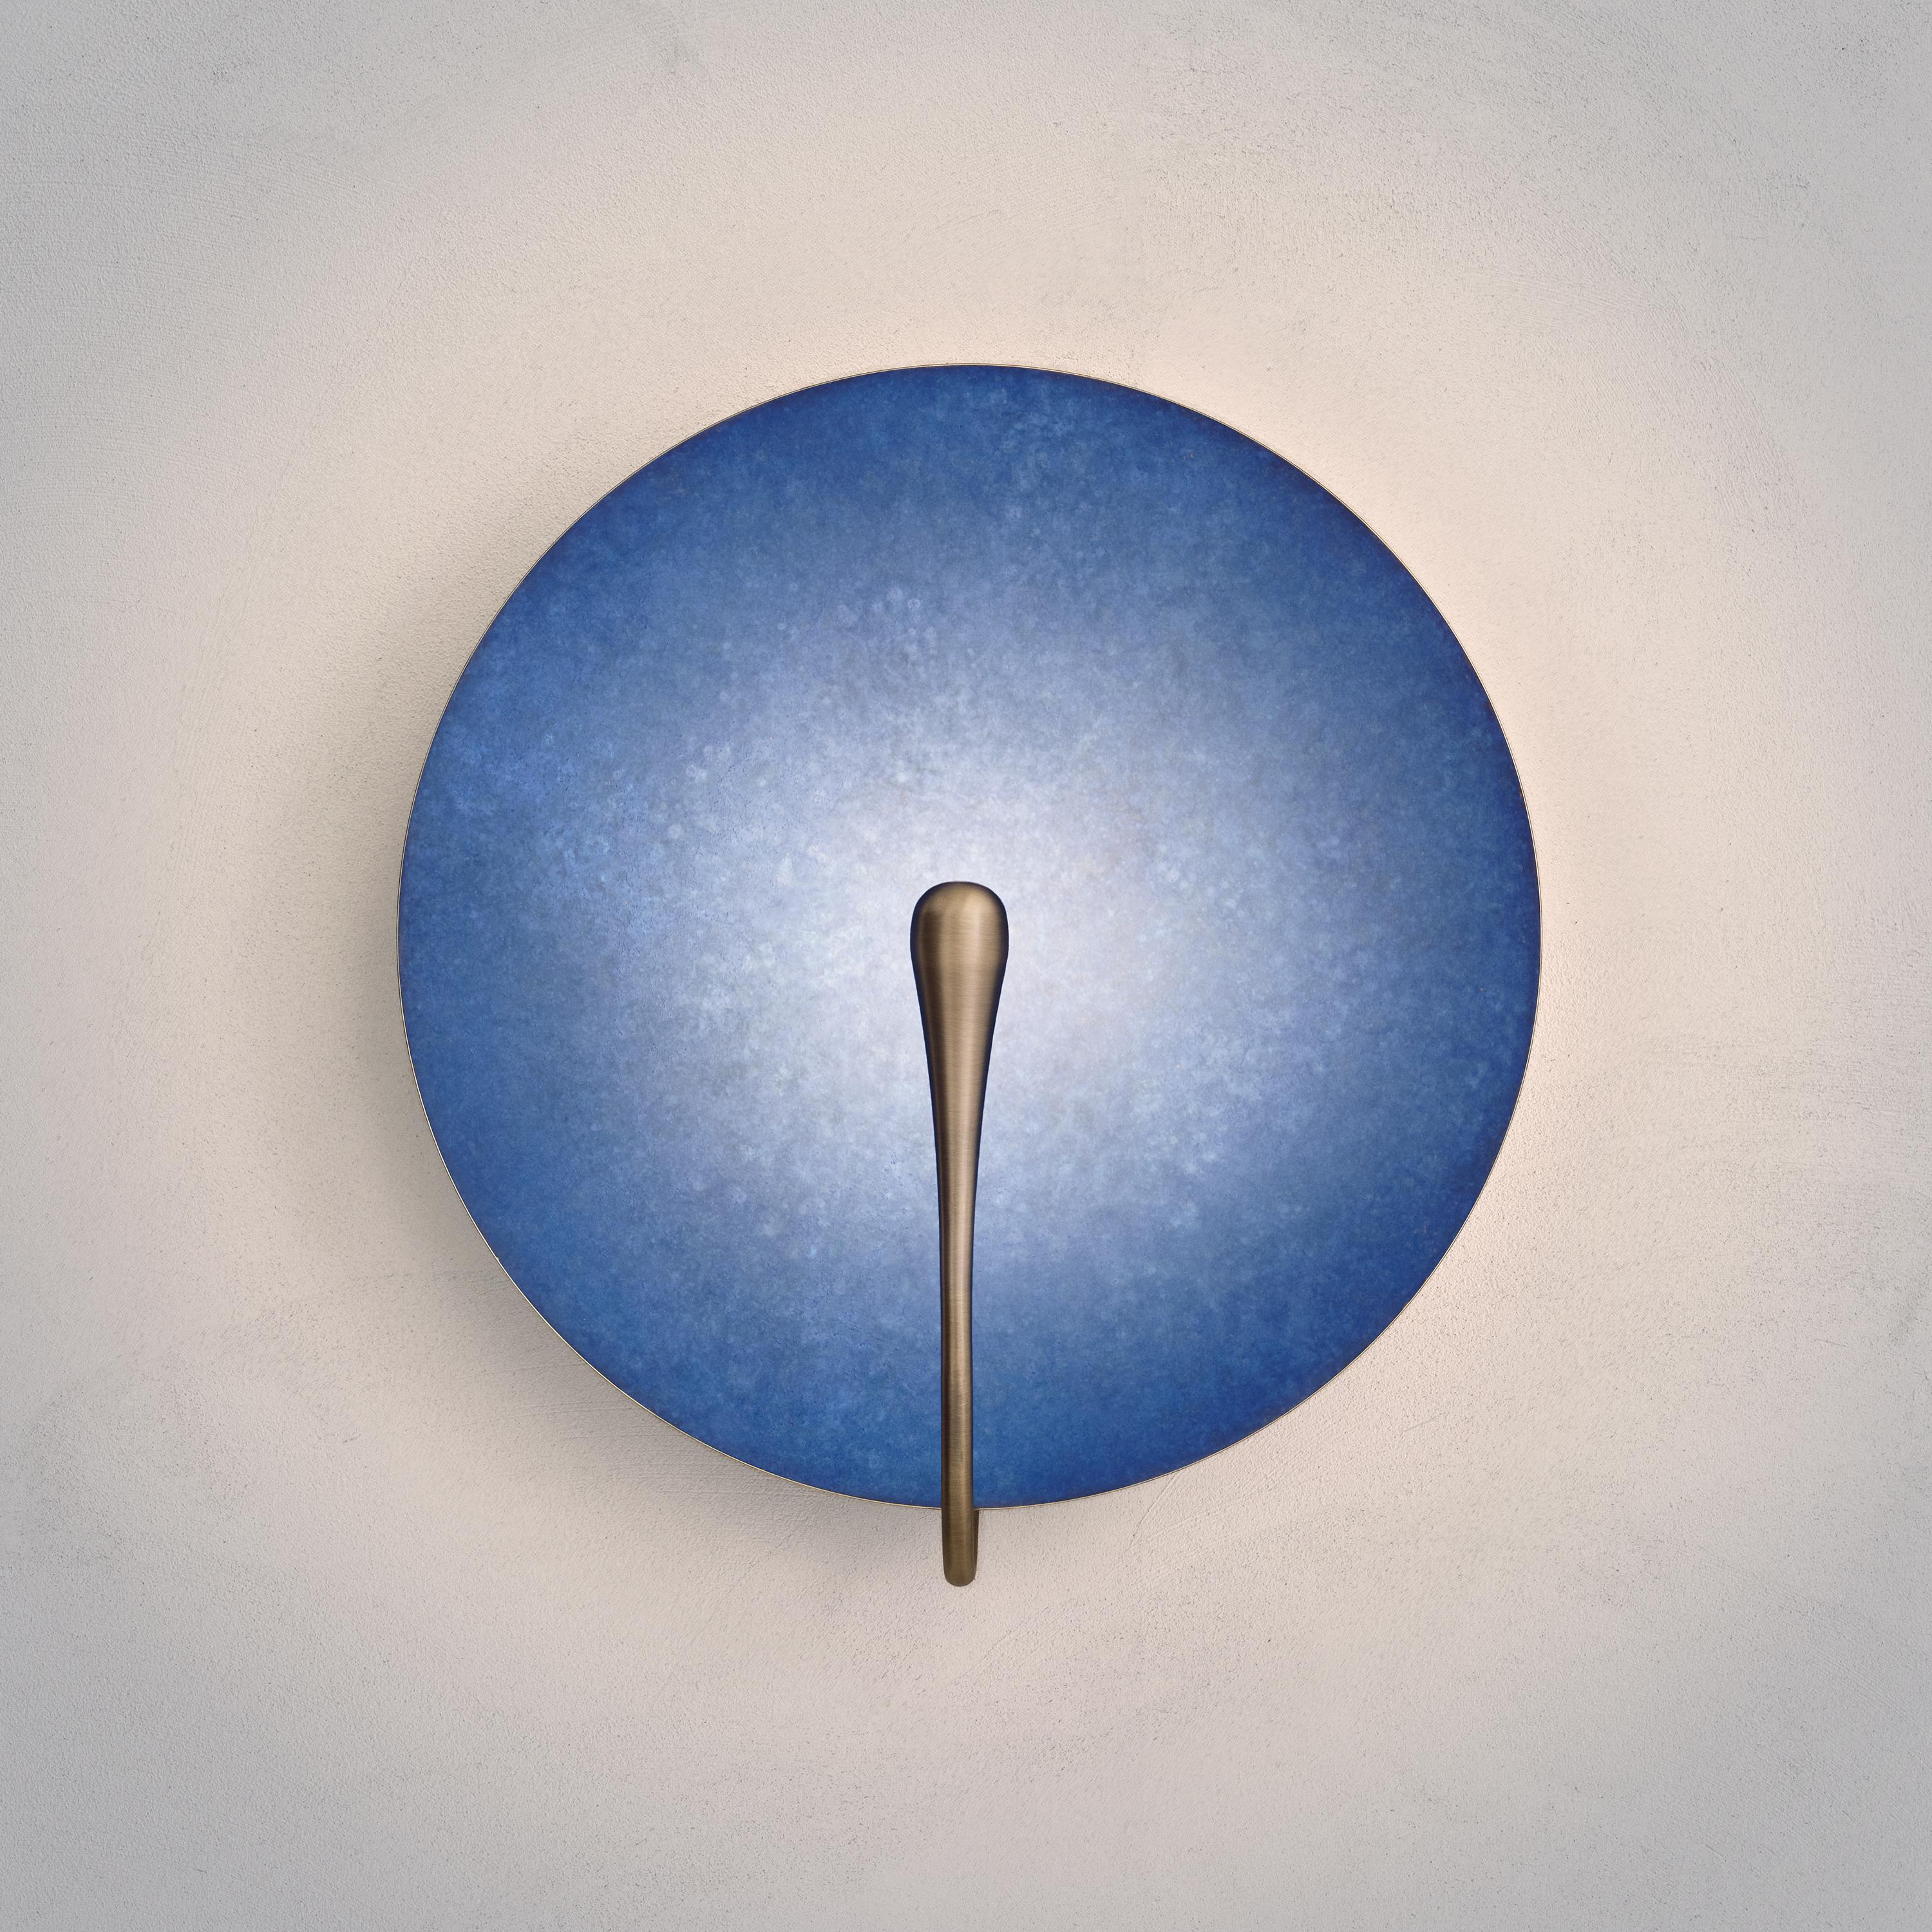 Inspired by the beautiful textures of nature, a bright indigo patina is applied on a hand-spun brass plate to create this unique finish.
 
Softly illuminated with integrated LED from within, this sculptural wall piece sits elegantly in both